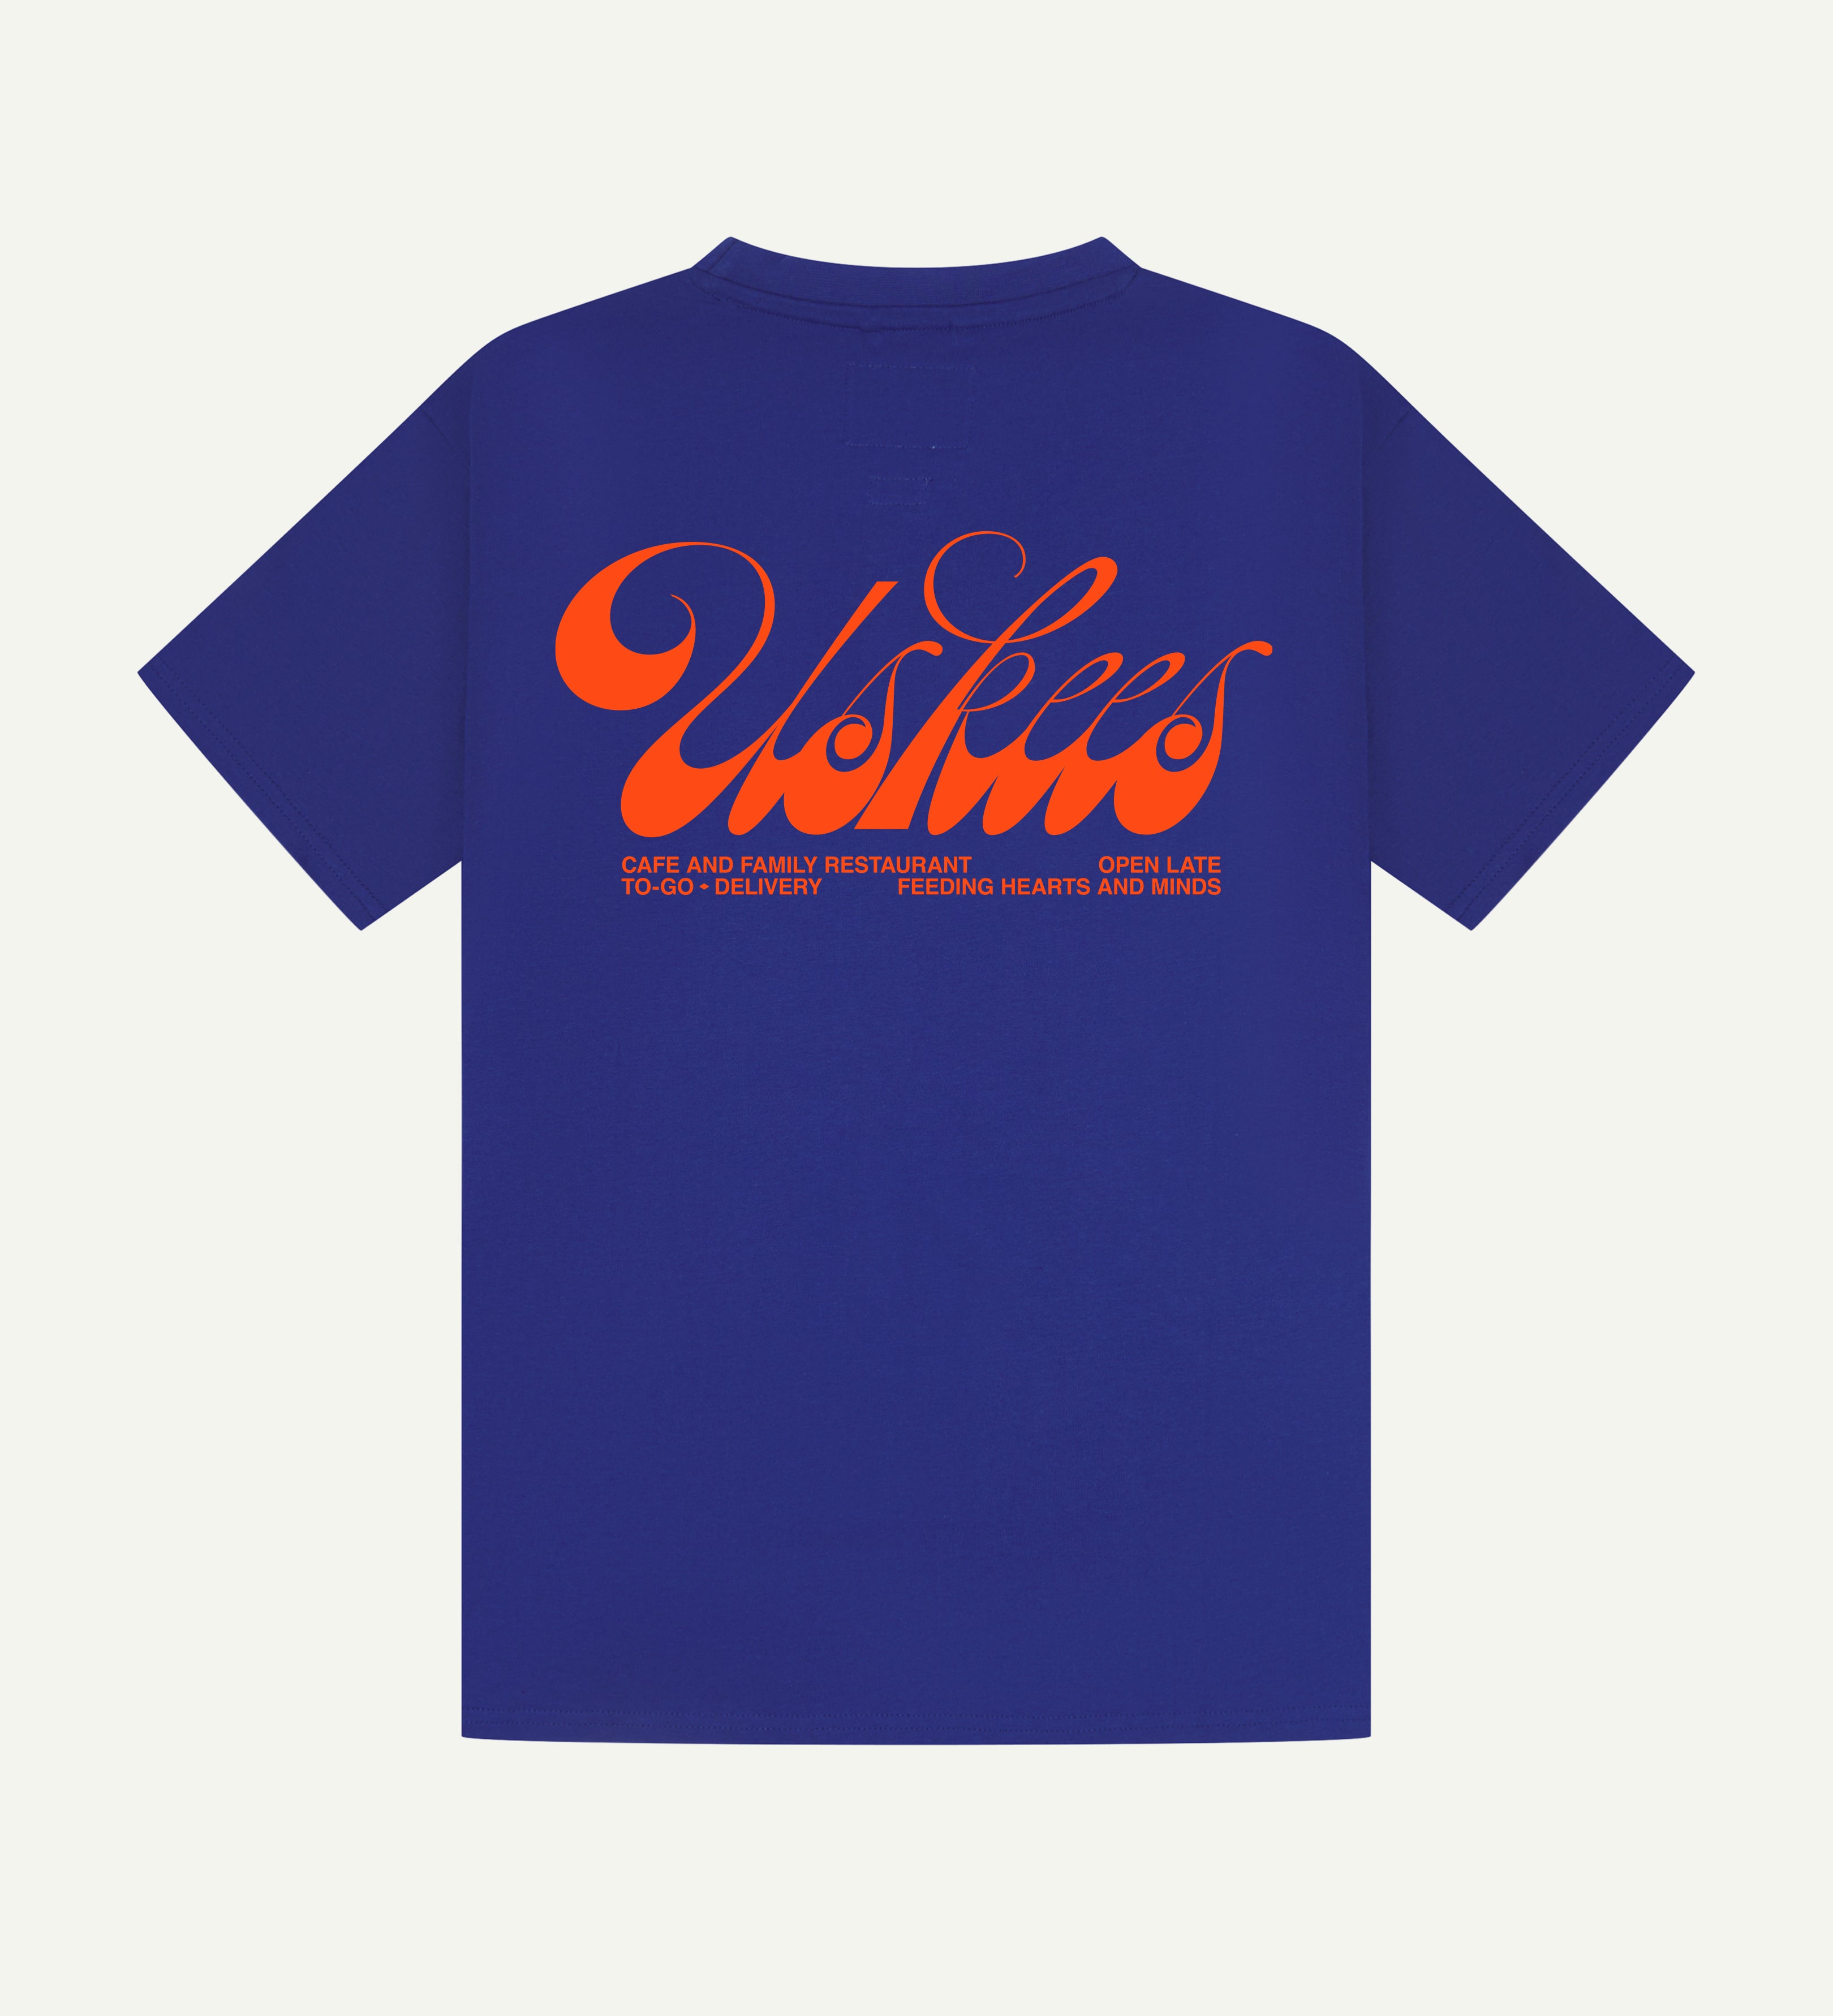 Back flat shot of the uskees men's graphic Tee in ultra blue showing the 'diner' logo in orange